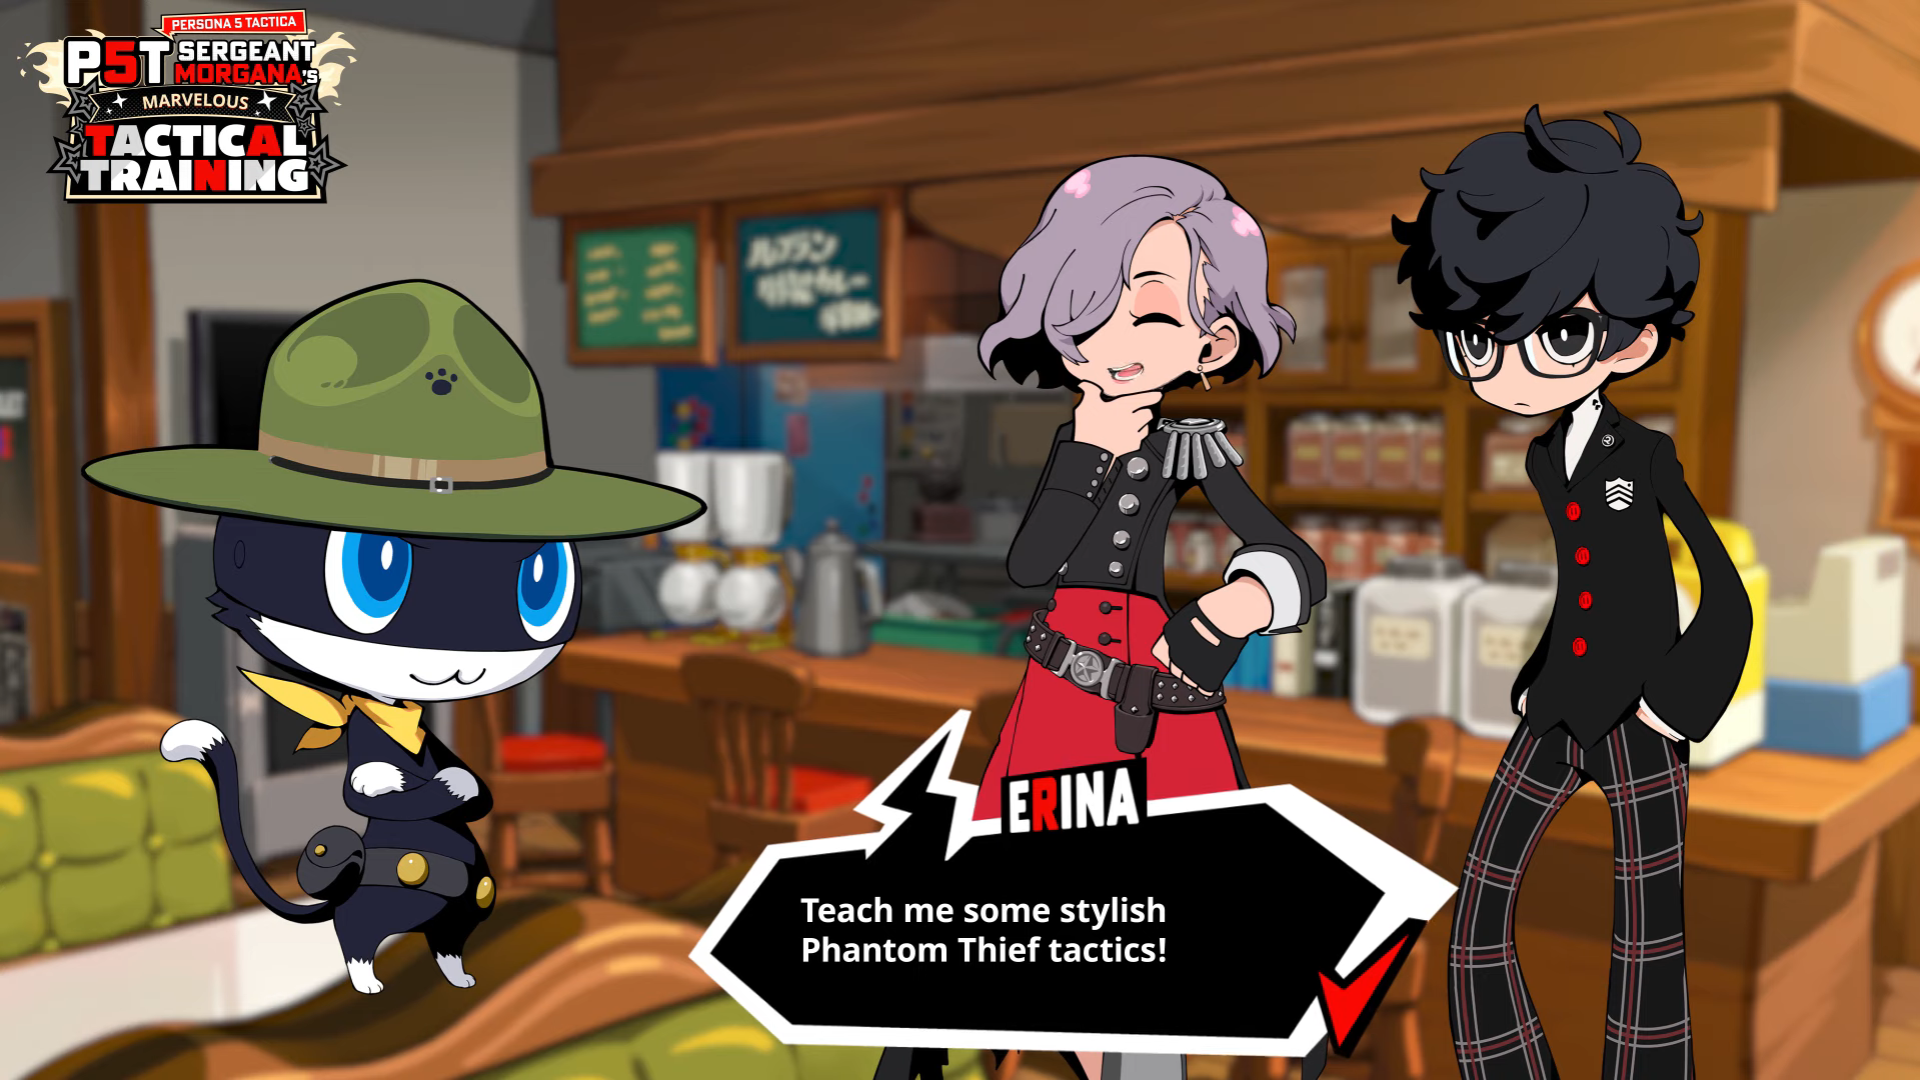 New Persona 5 Tactica English Trailer Teaches Importance of Combat Cover